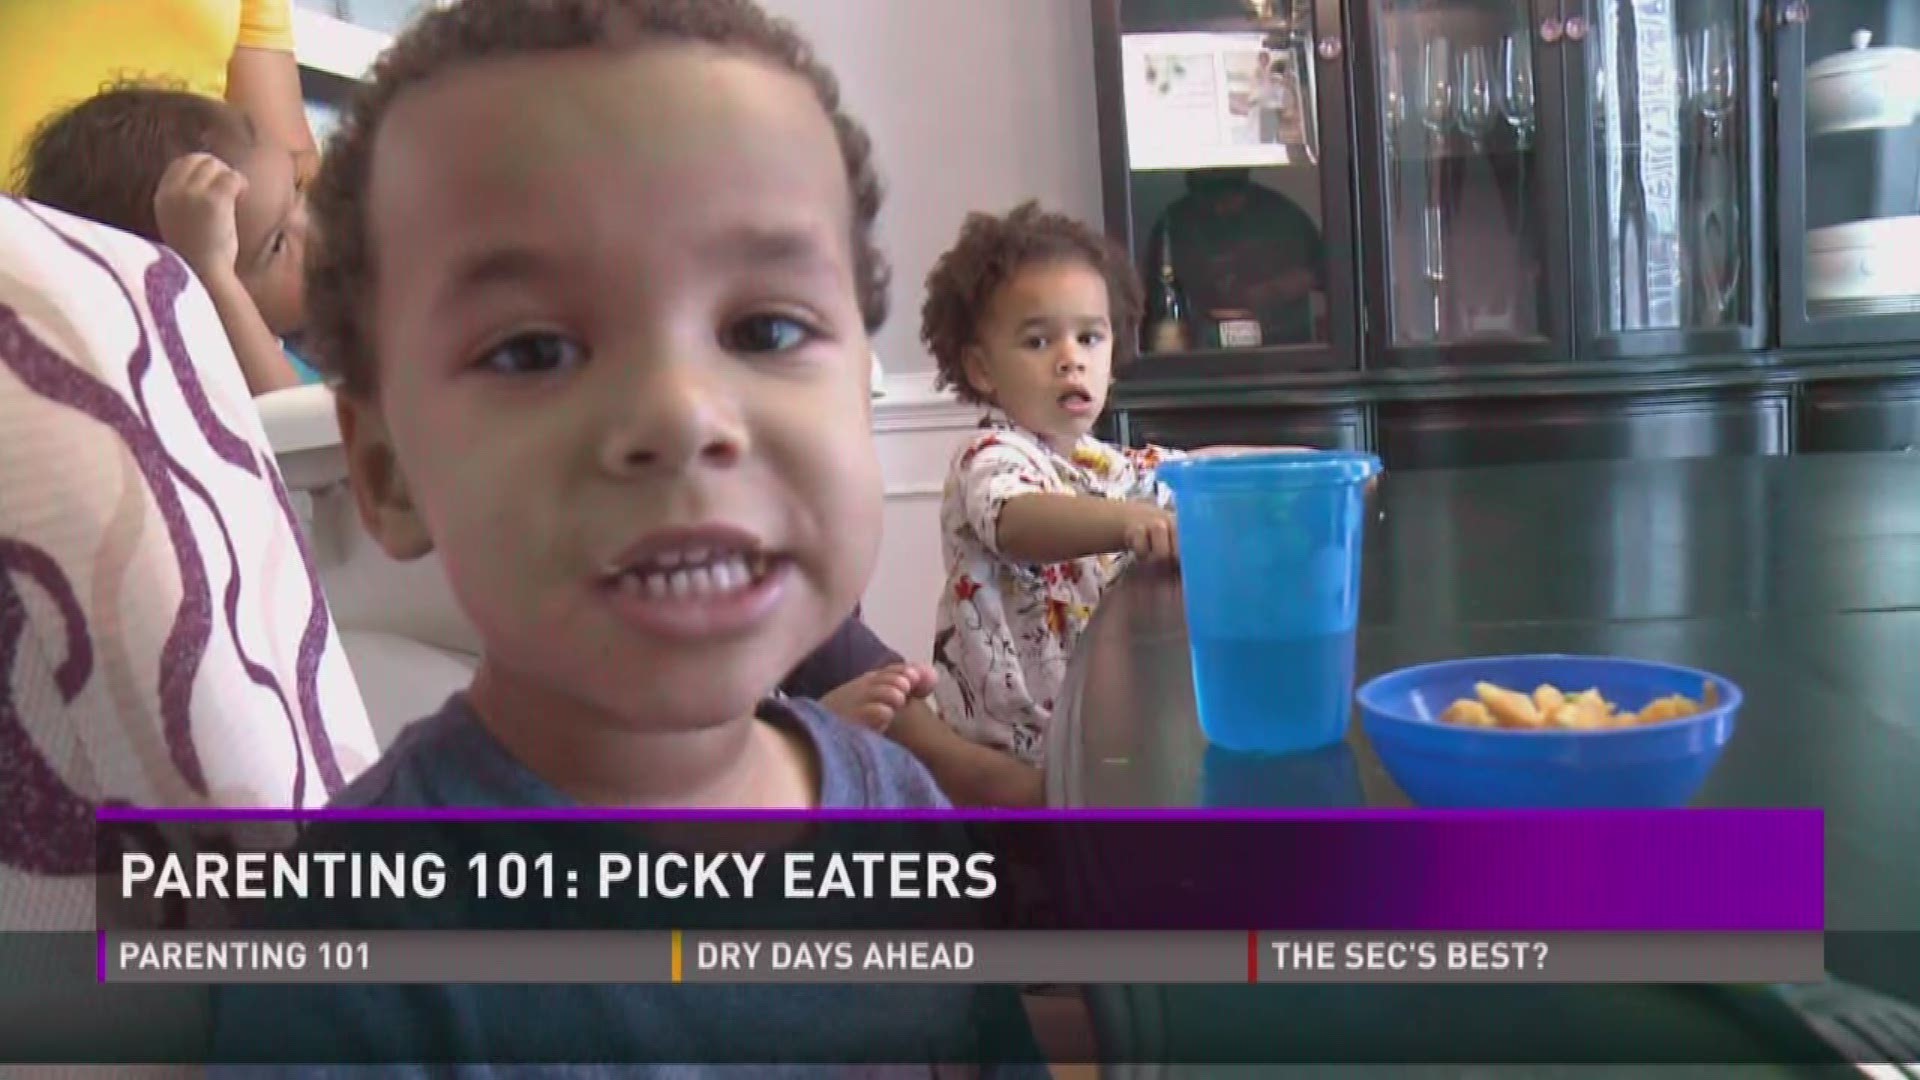 Sept. 19, 2017: When kids are young, mealtime might just be one of the toughest parts of being a parent. A registered dietitian says the key is in the way you prepare the food.